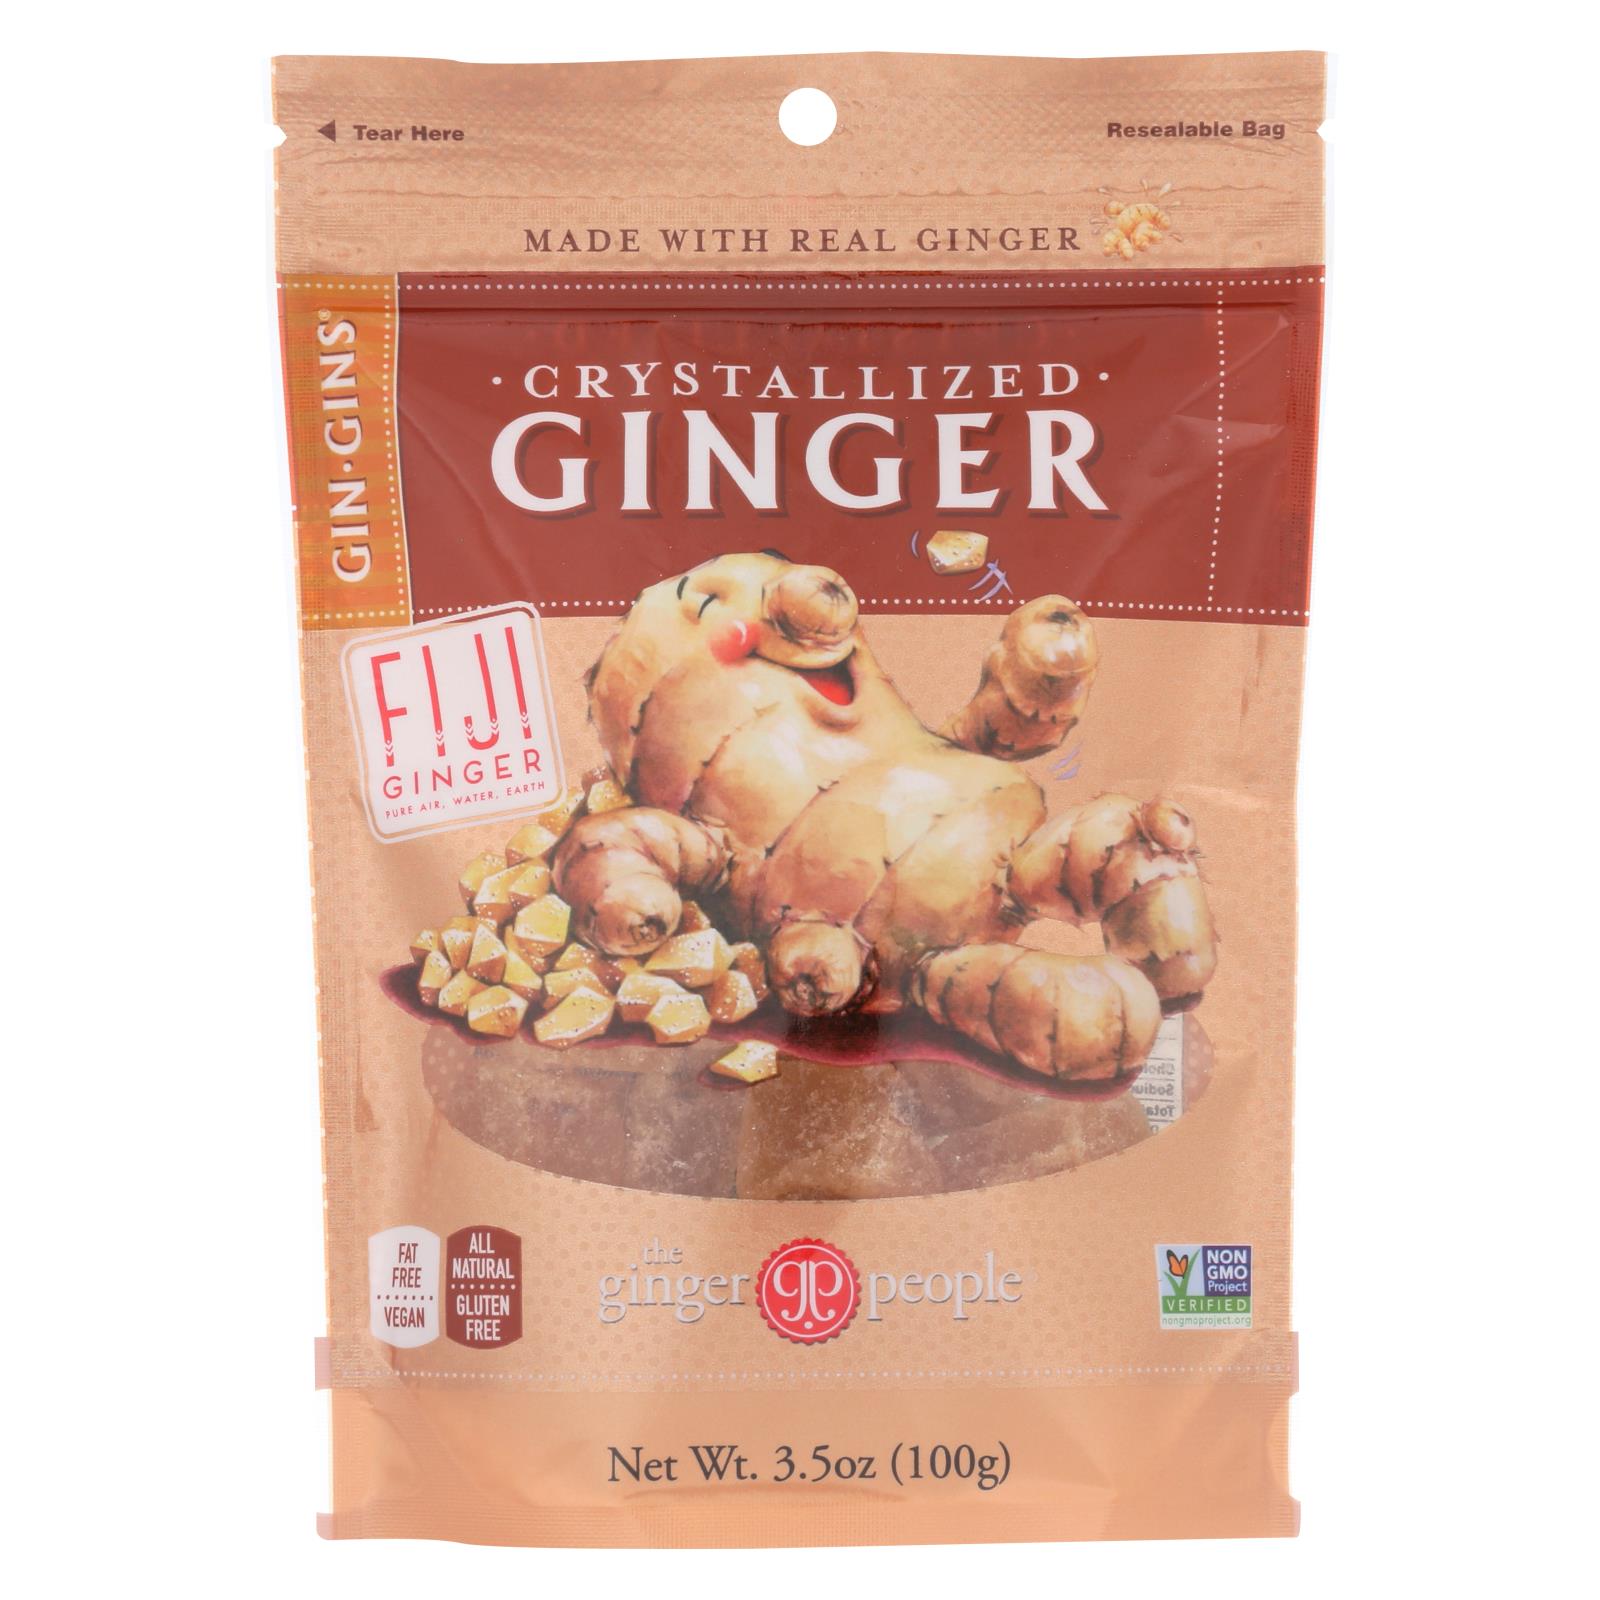 Ginger People - Crystallized Ginger - 12개 묶음상품 - 3.5 oz.